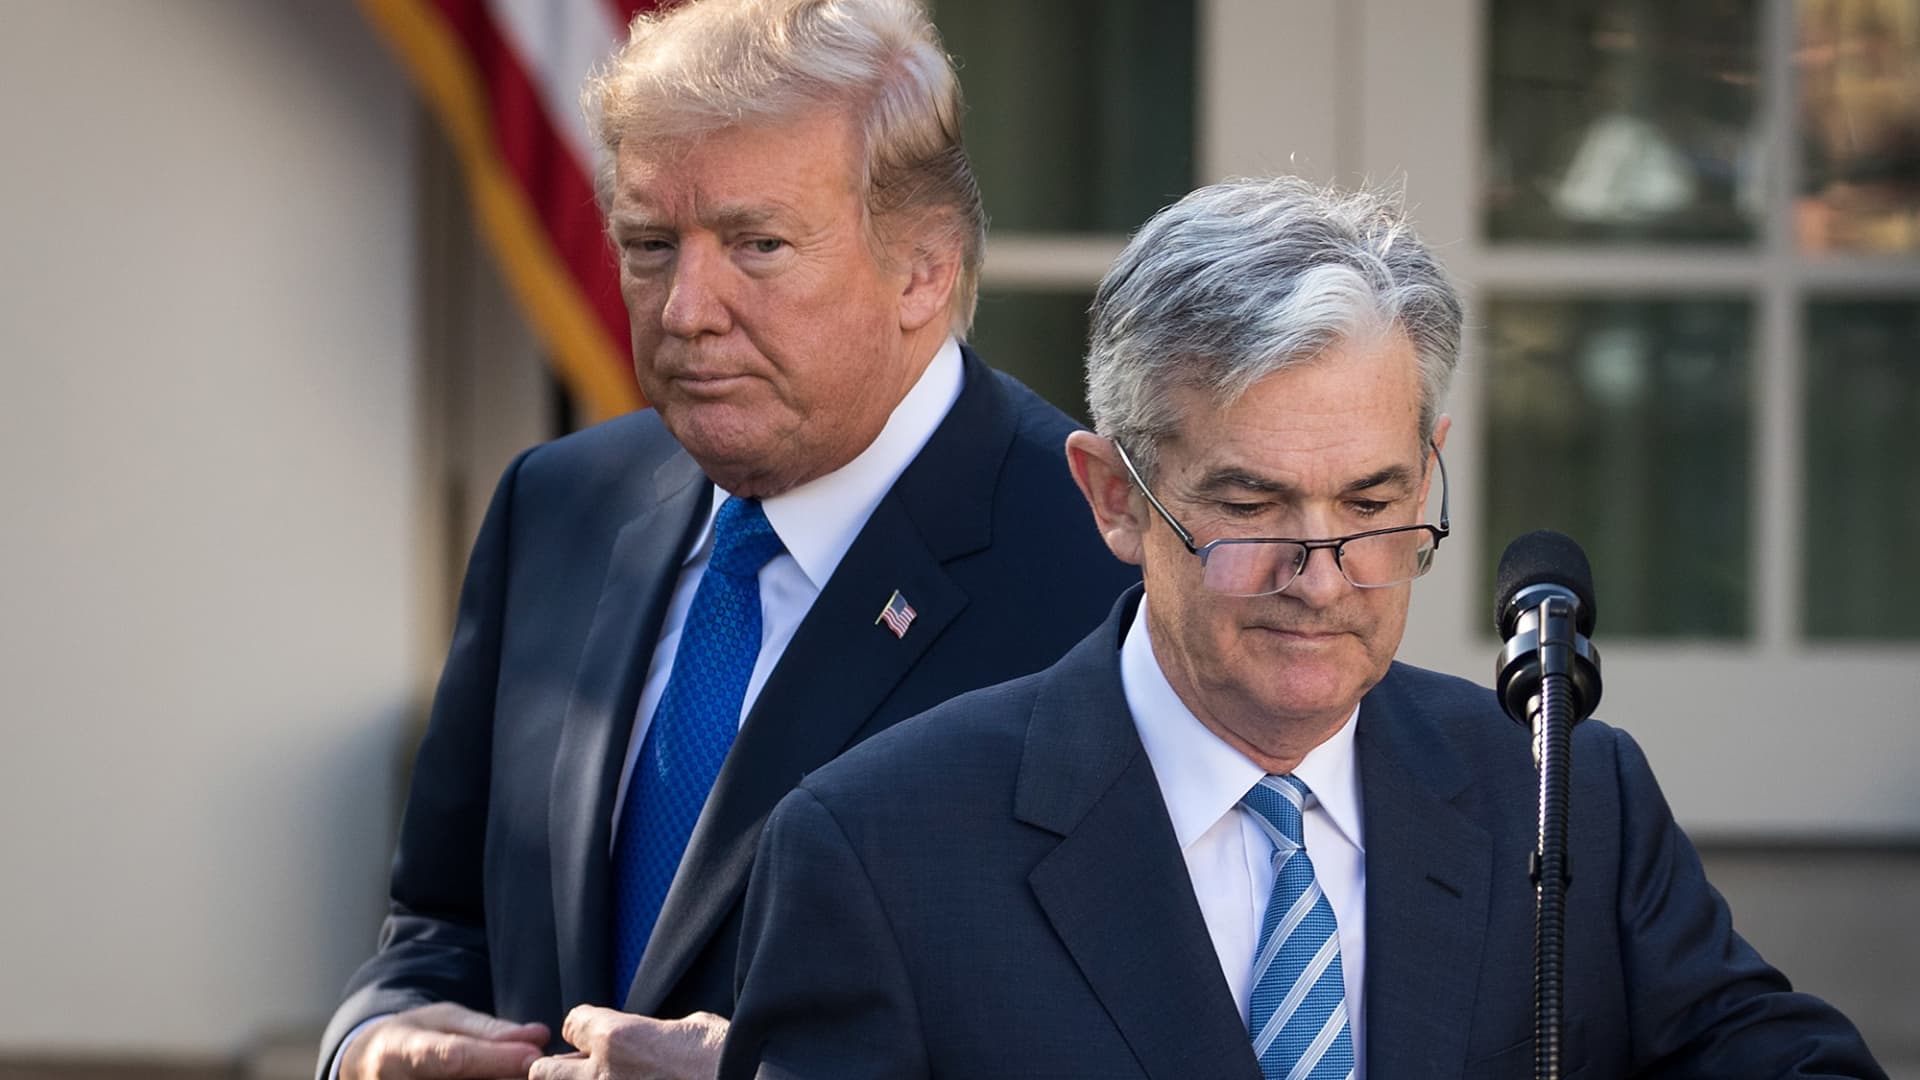 Trump attacks Fed Chair he appointed, because how dare the economy be so good without him? (crooksandliars.com)